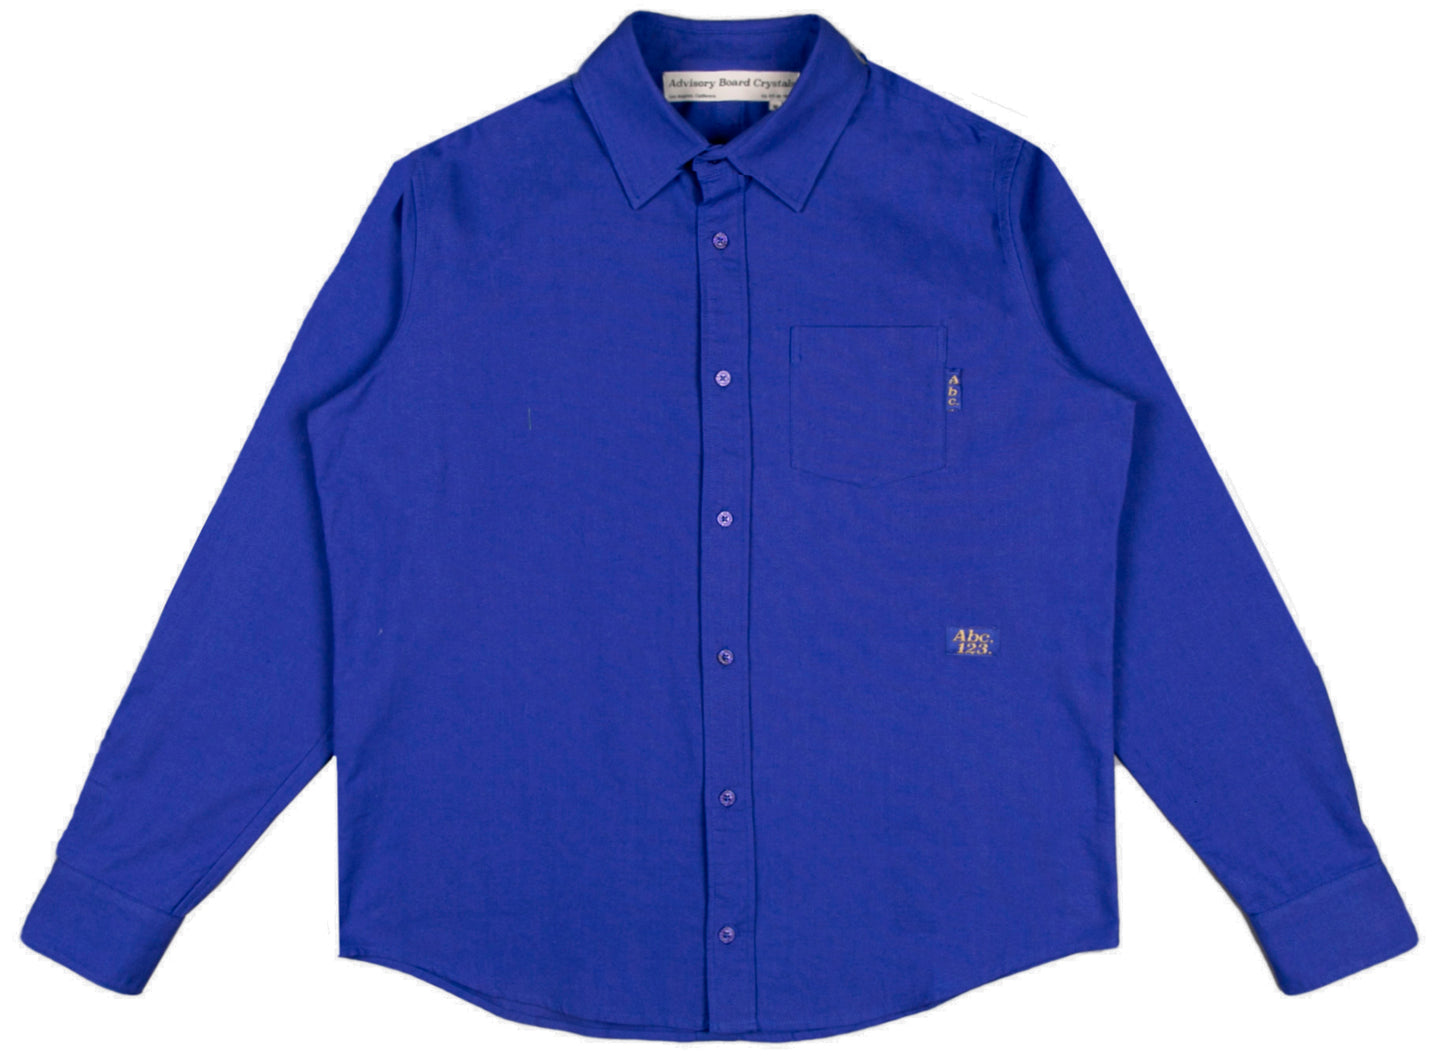 Advisory Board Crystals Abc. 123. Oxford Shirt in Sapphire